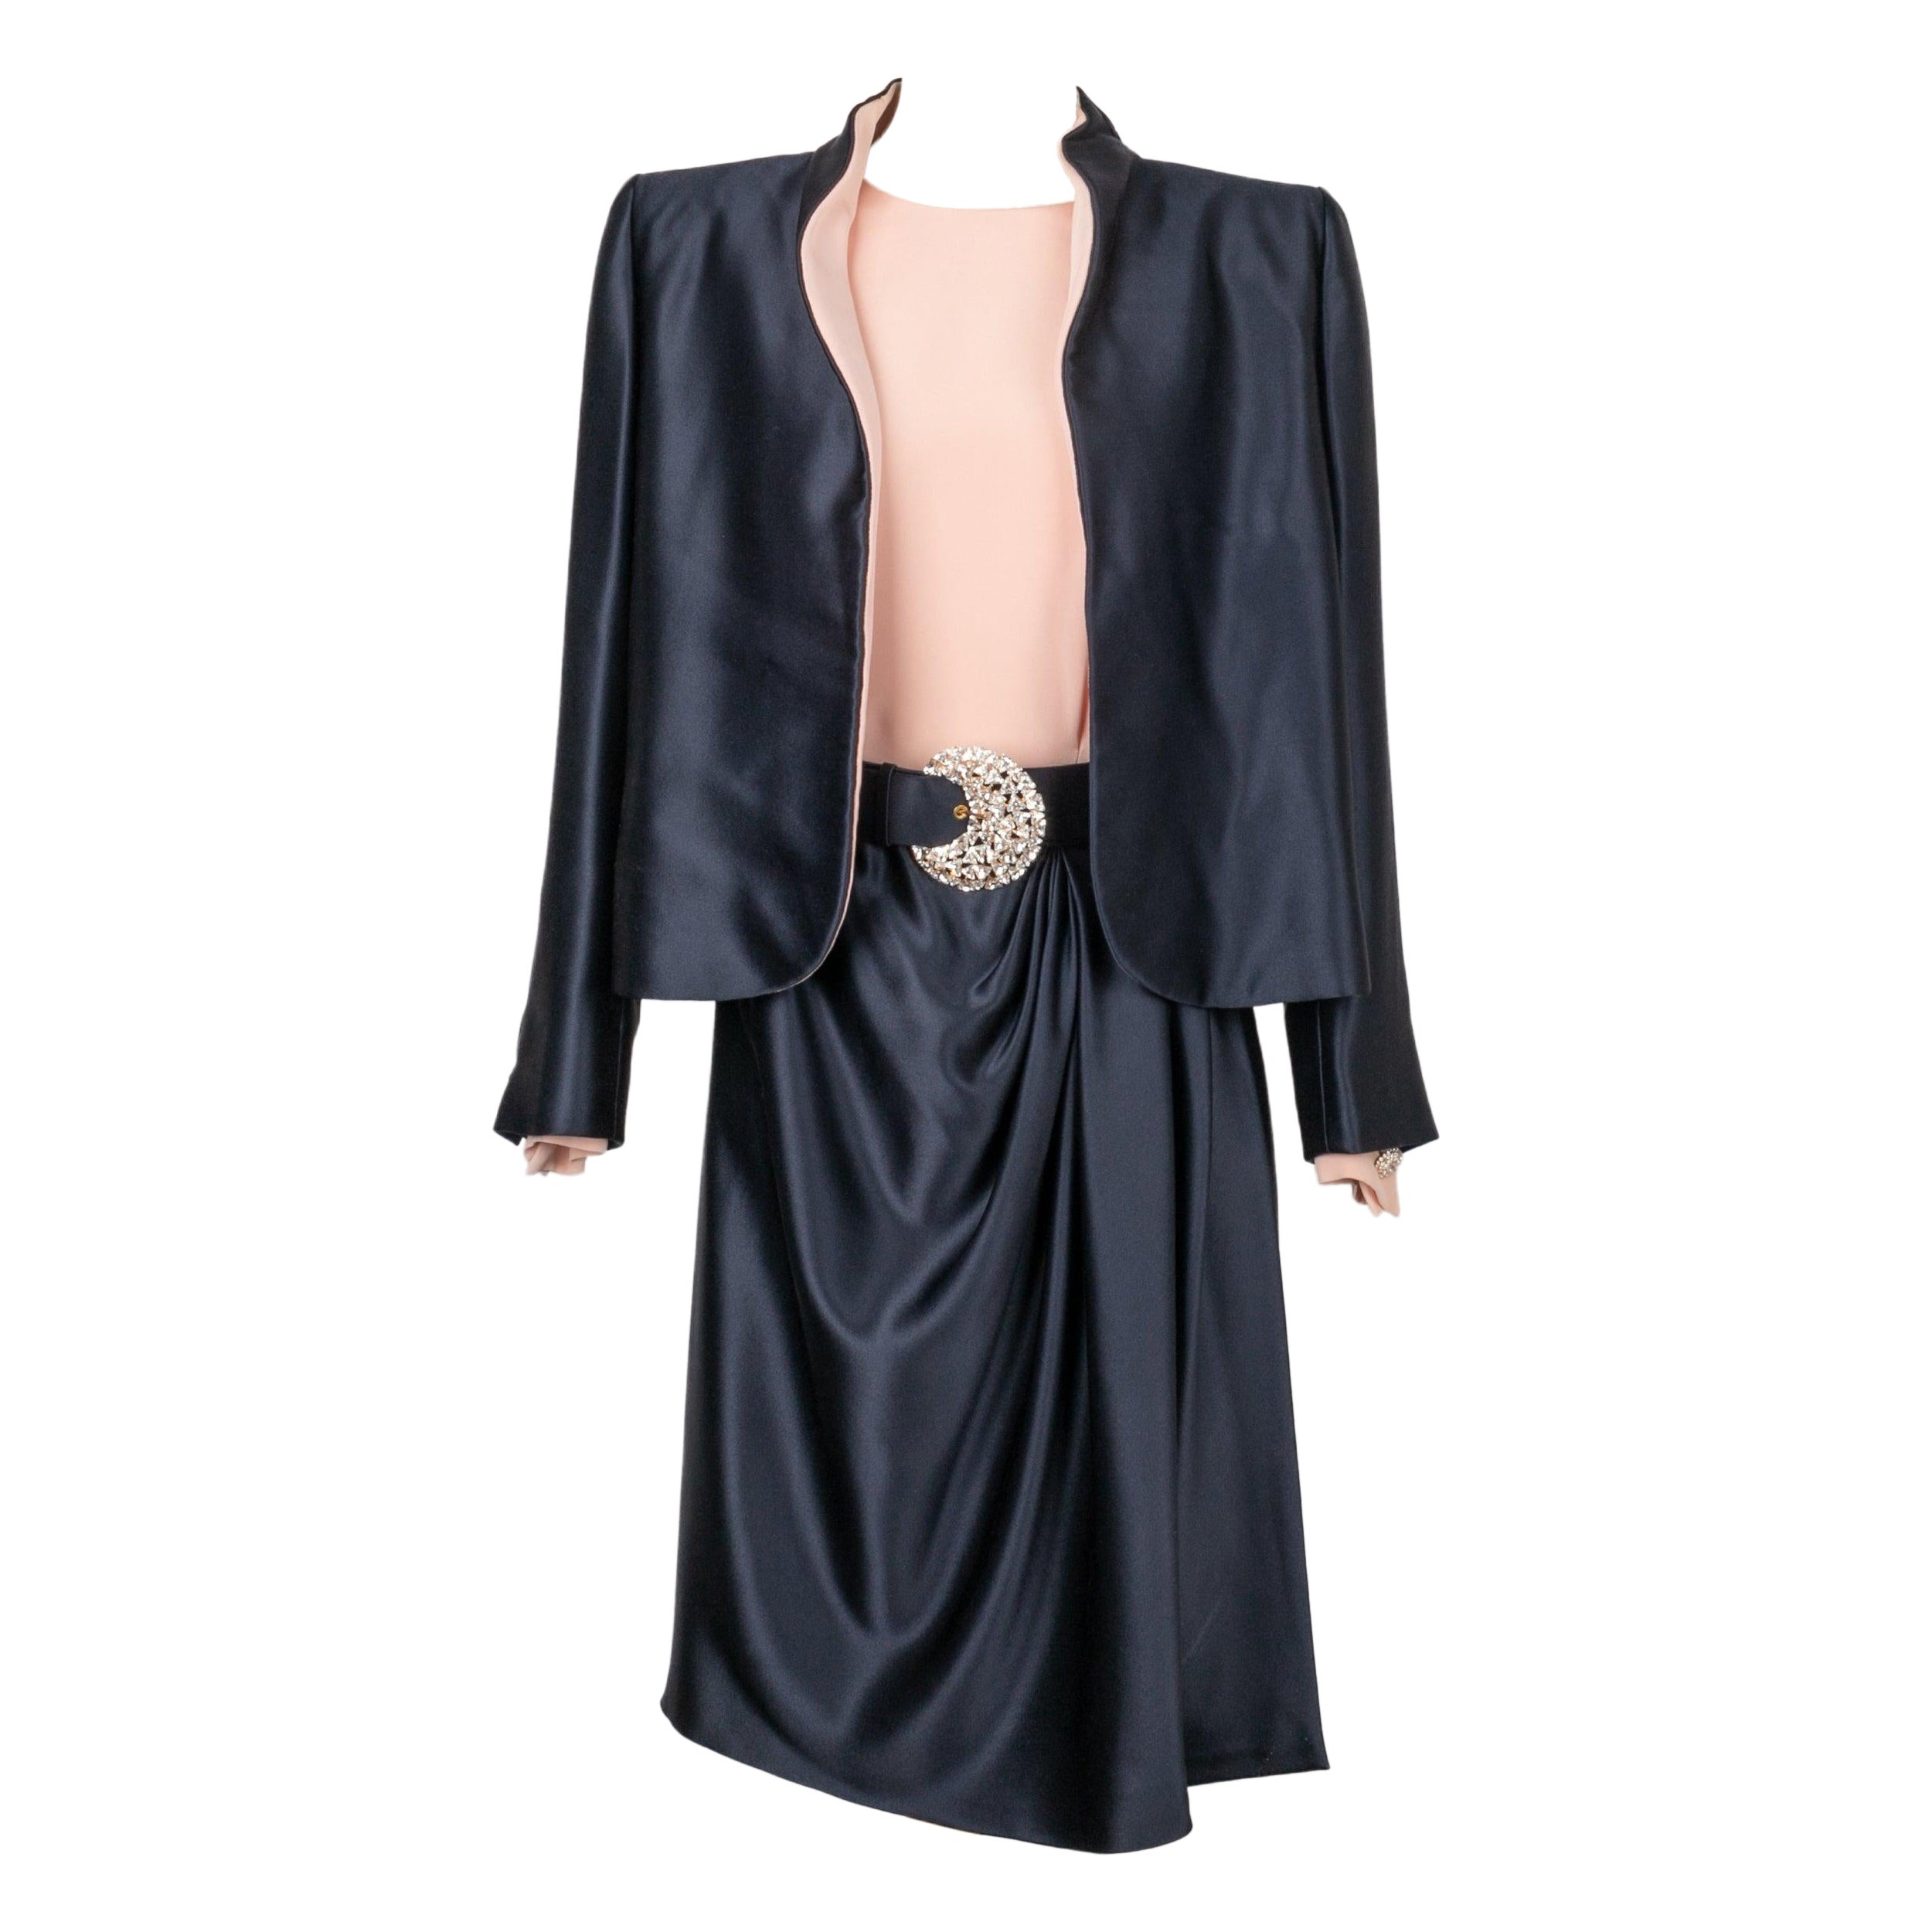 Yves Saint Laurent Haute Couture Set of Jacket, Skirt, Belt and Long-Sleeve Top For Sale